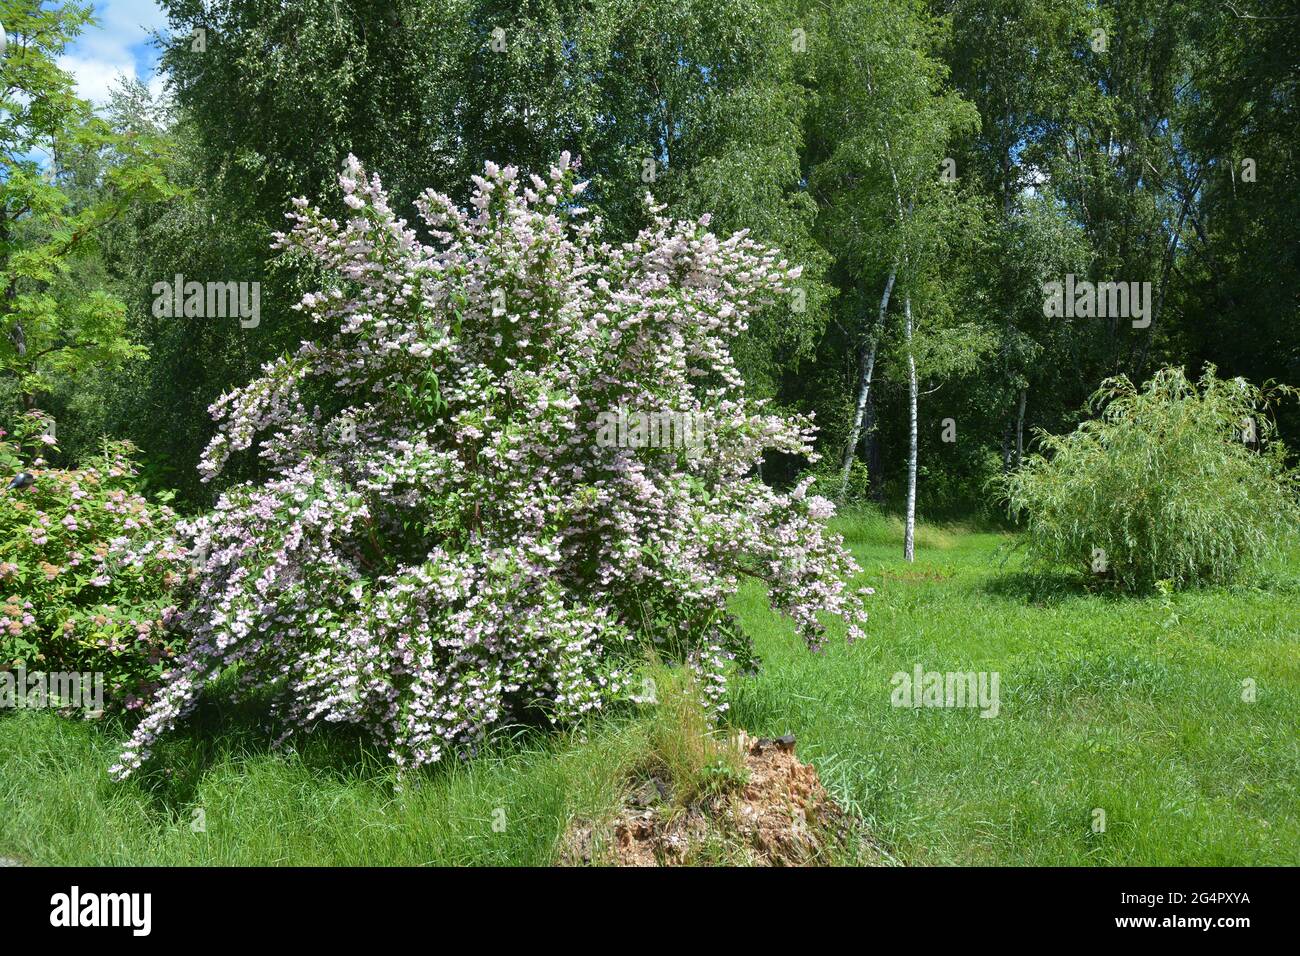 An ornamental bush of Deutzia with pink tender flowers in landscape design. Deutzia scabra Codsall Pink blooming with fuzzy white and pink flowers. Stock Photo